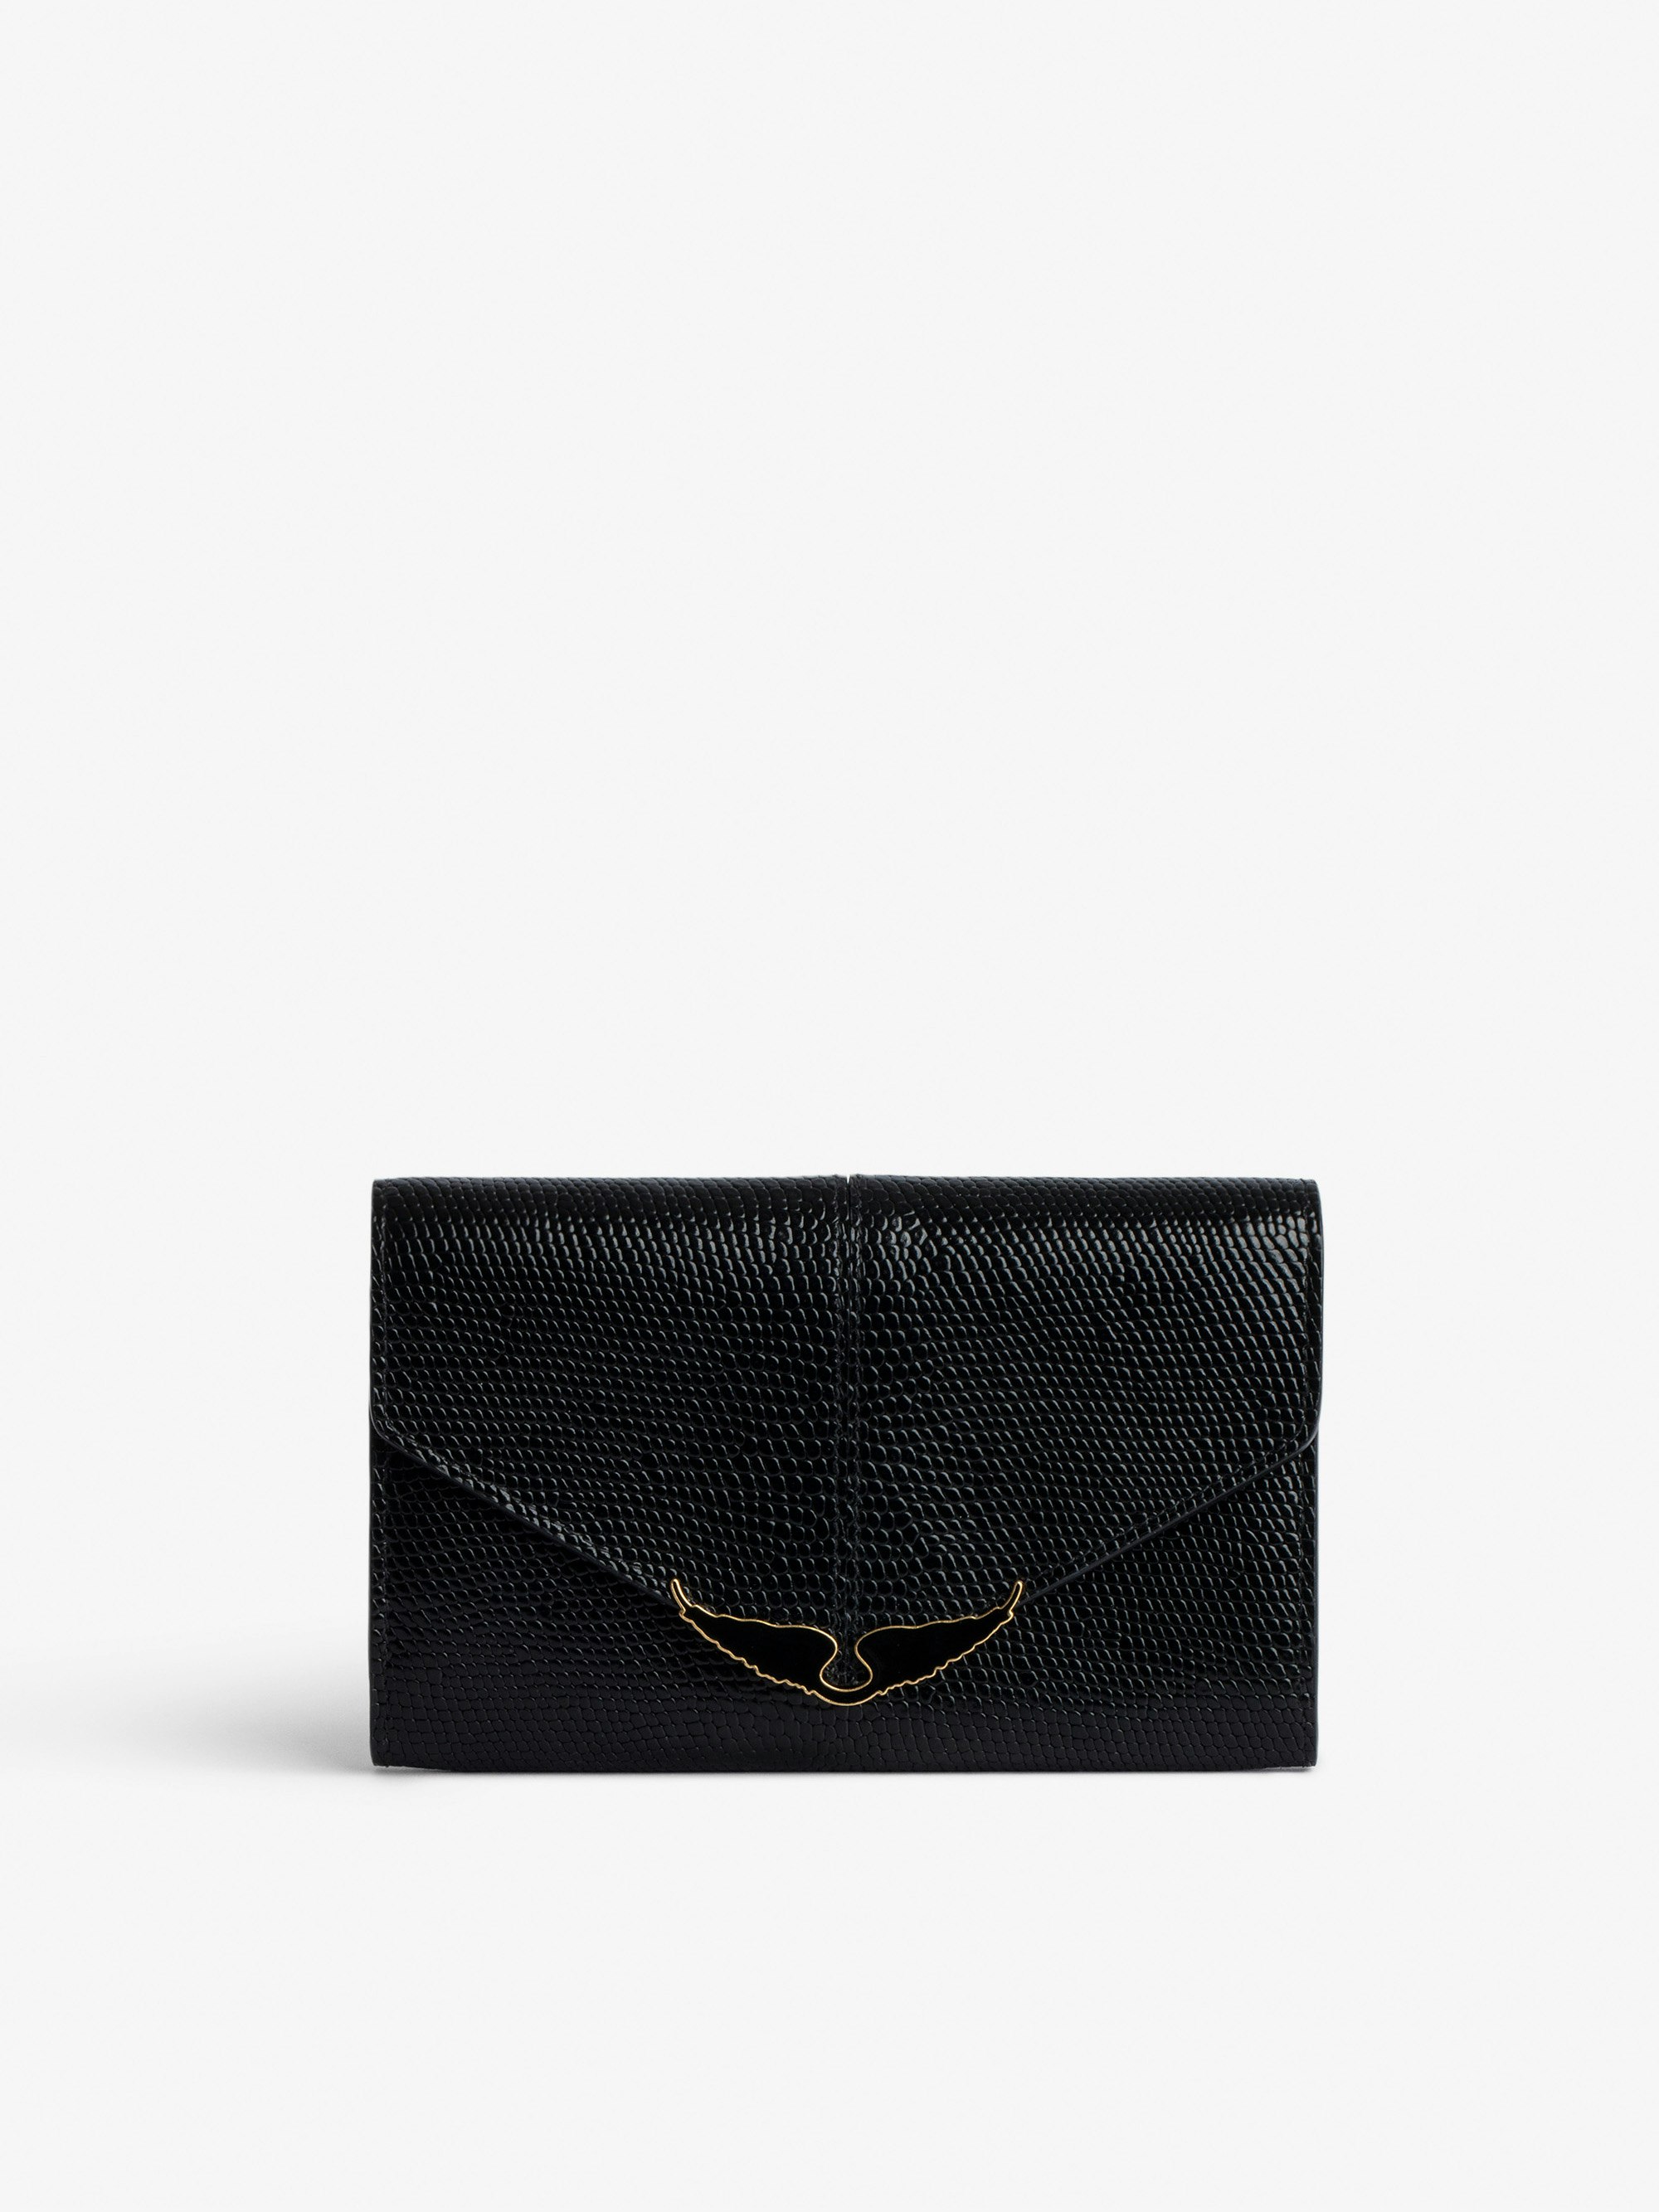 Borderline Wallet - Women’s wallet in shiny black leather with embossed iguana and black lacquered wings on the clasp.